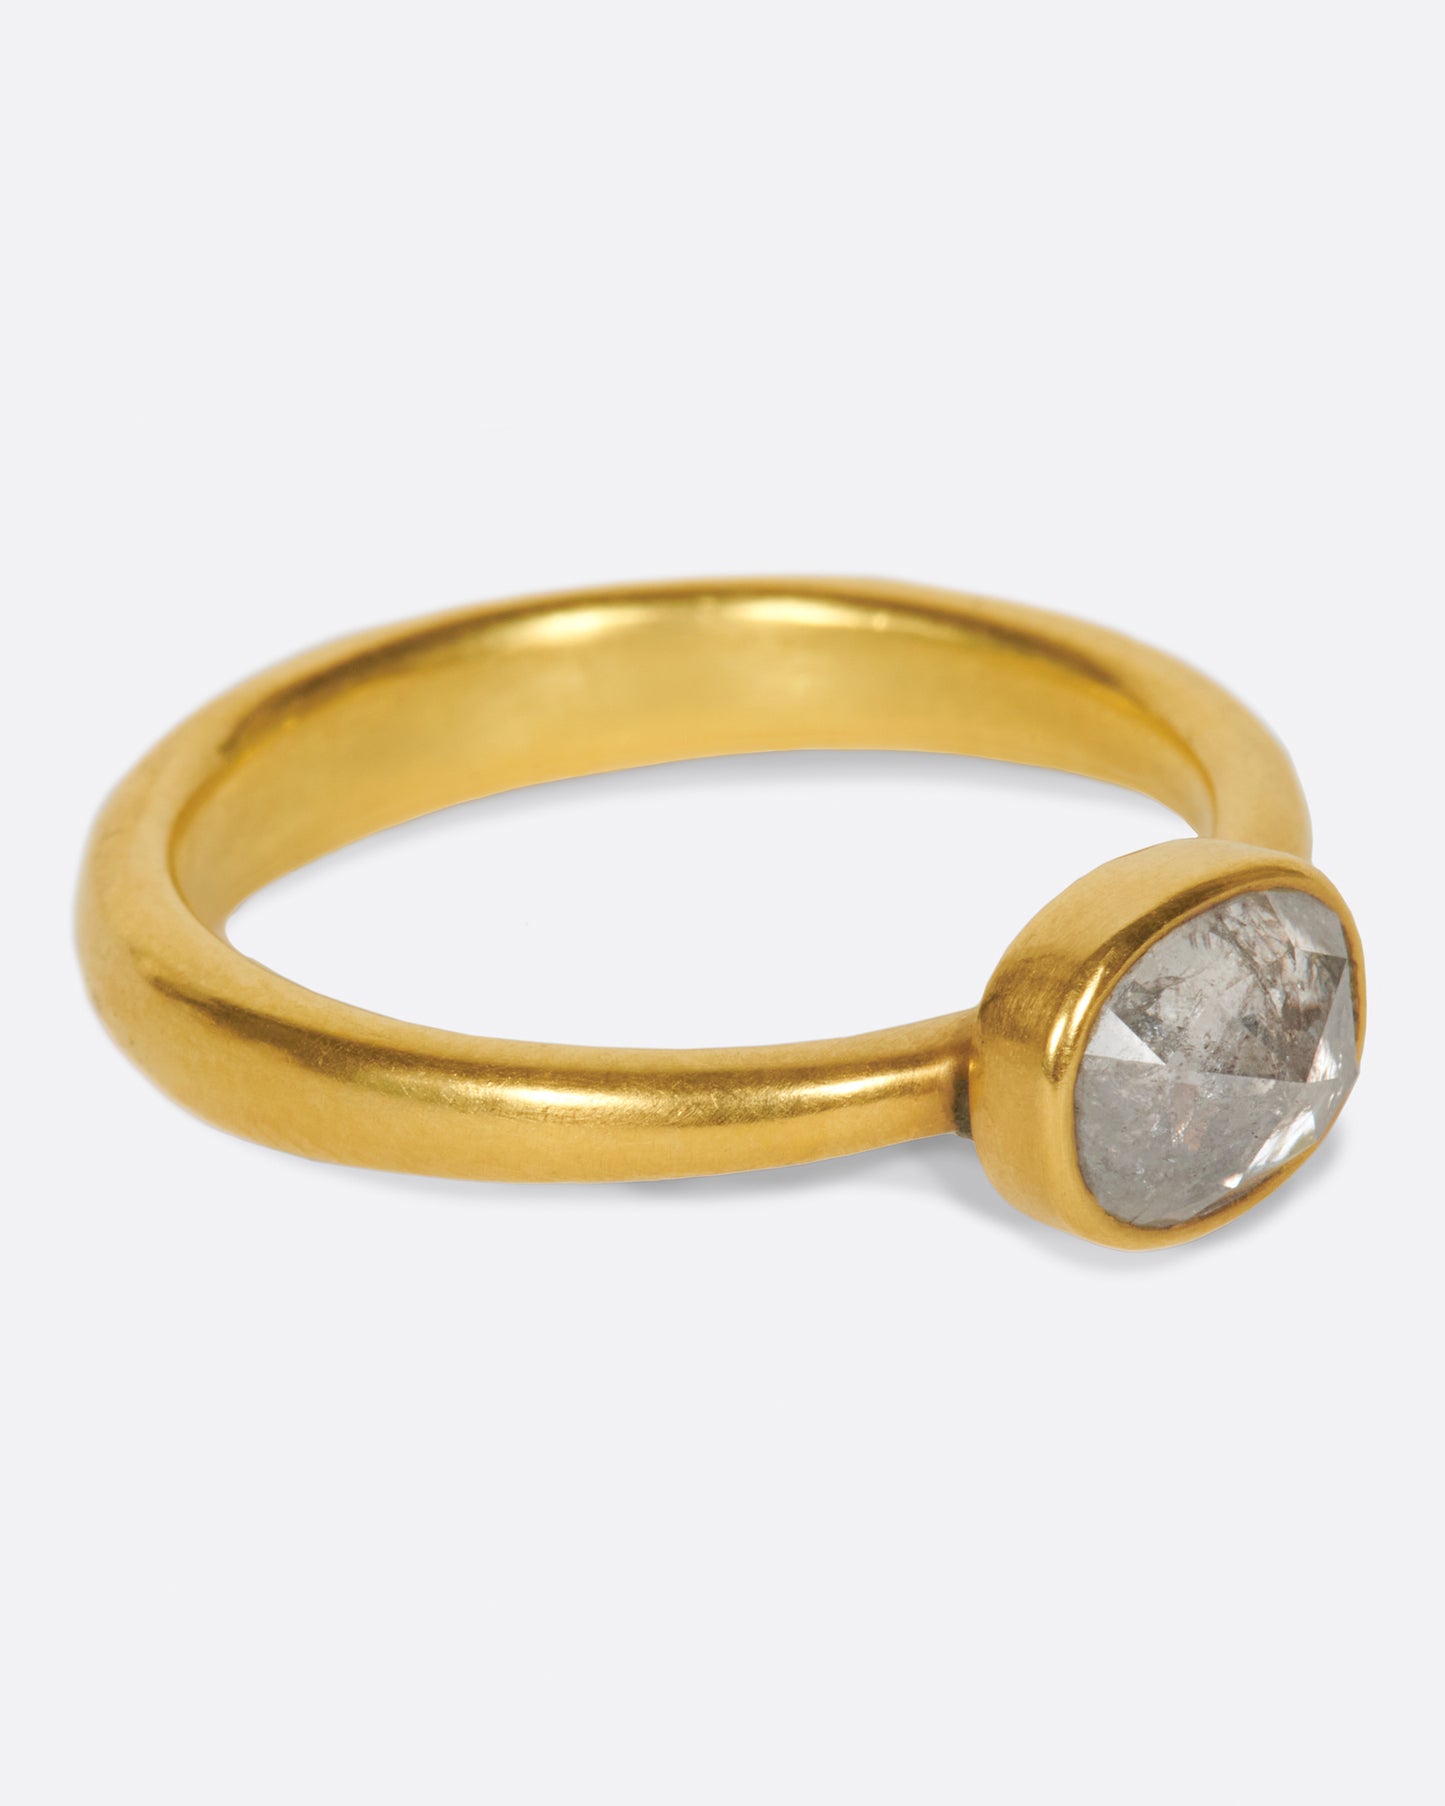 A pale grey, rose cut, oval diamond. Set horizontally on a simple, solid gold band, for a comfortably luxurious and unique design.